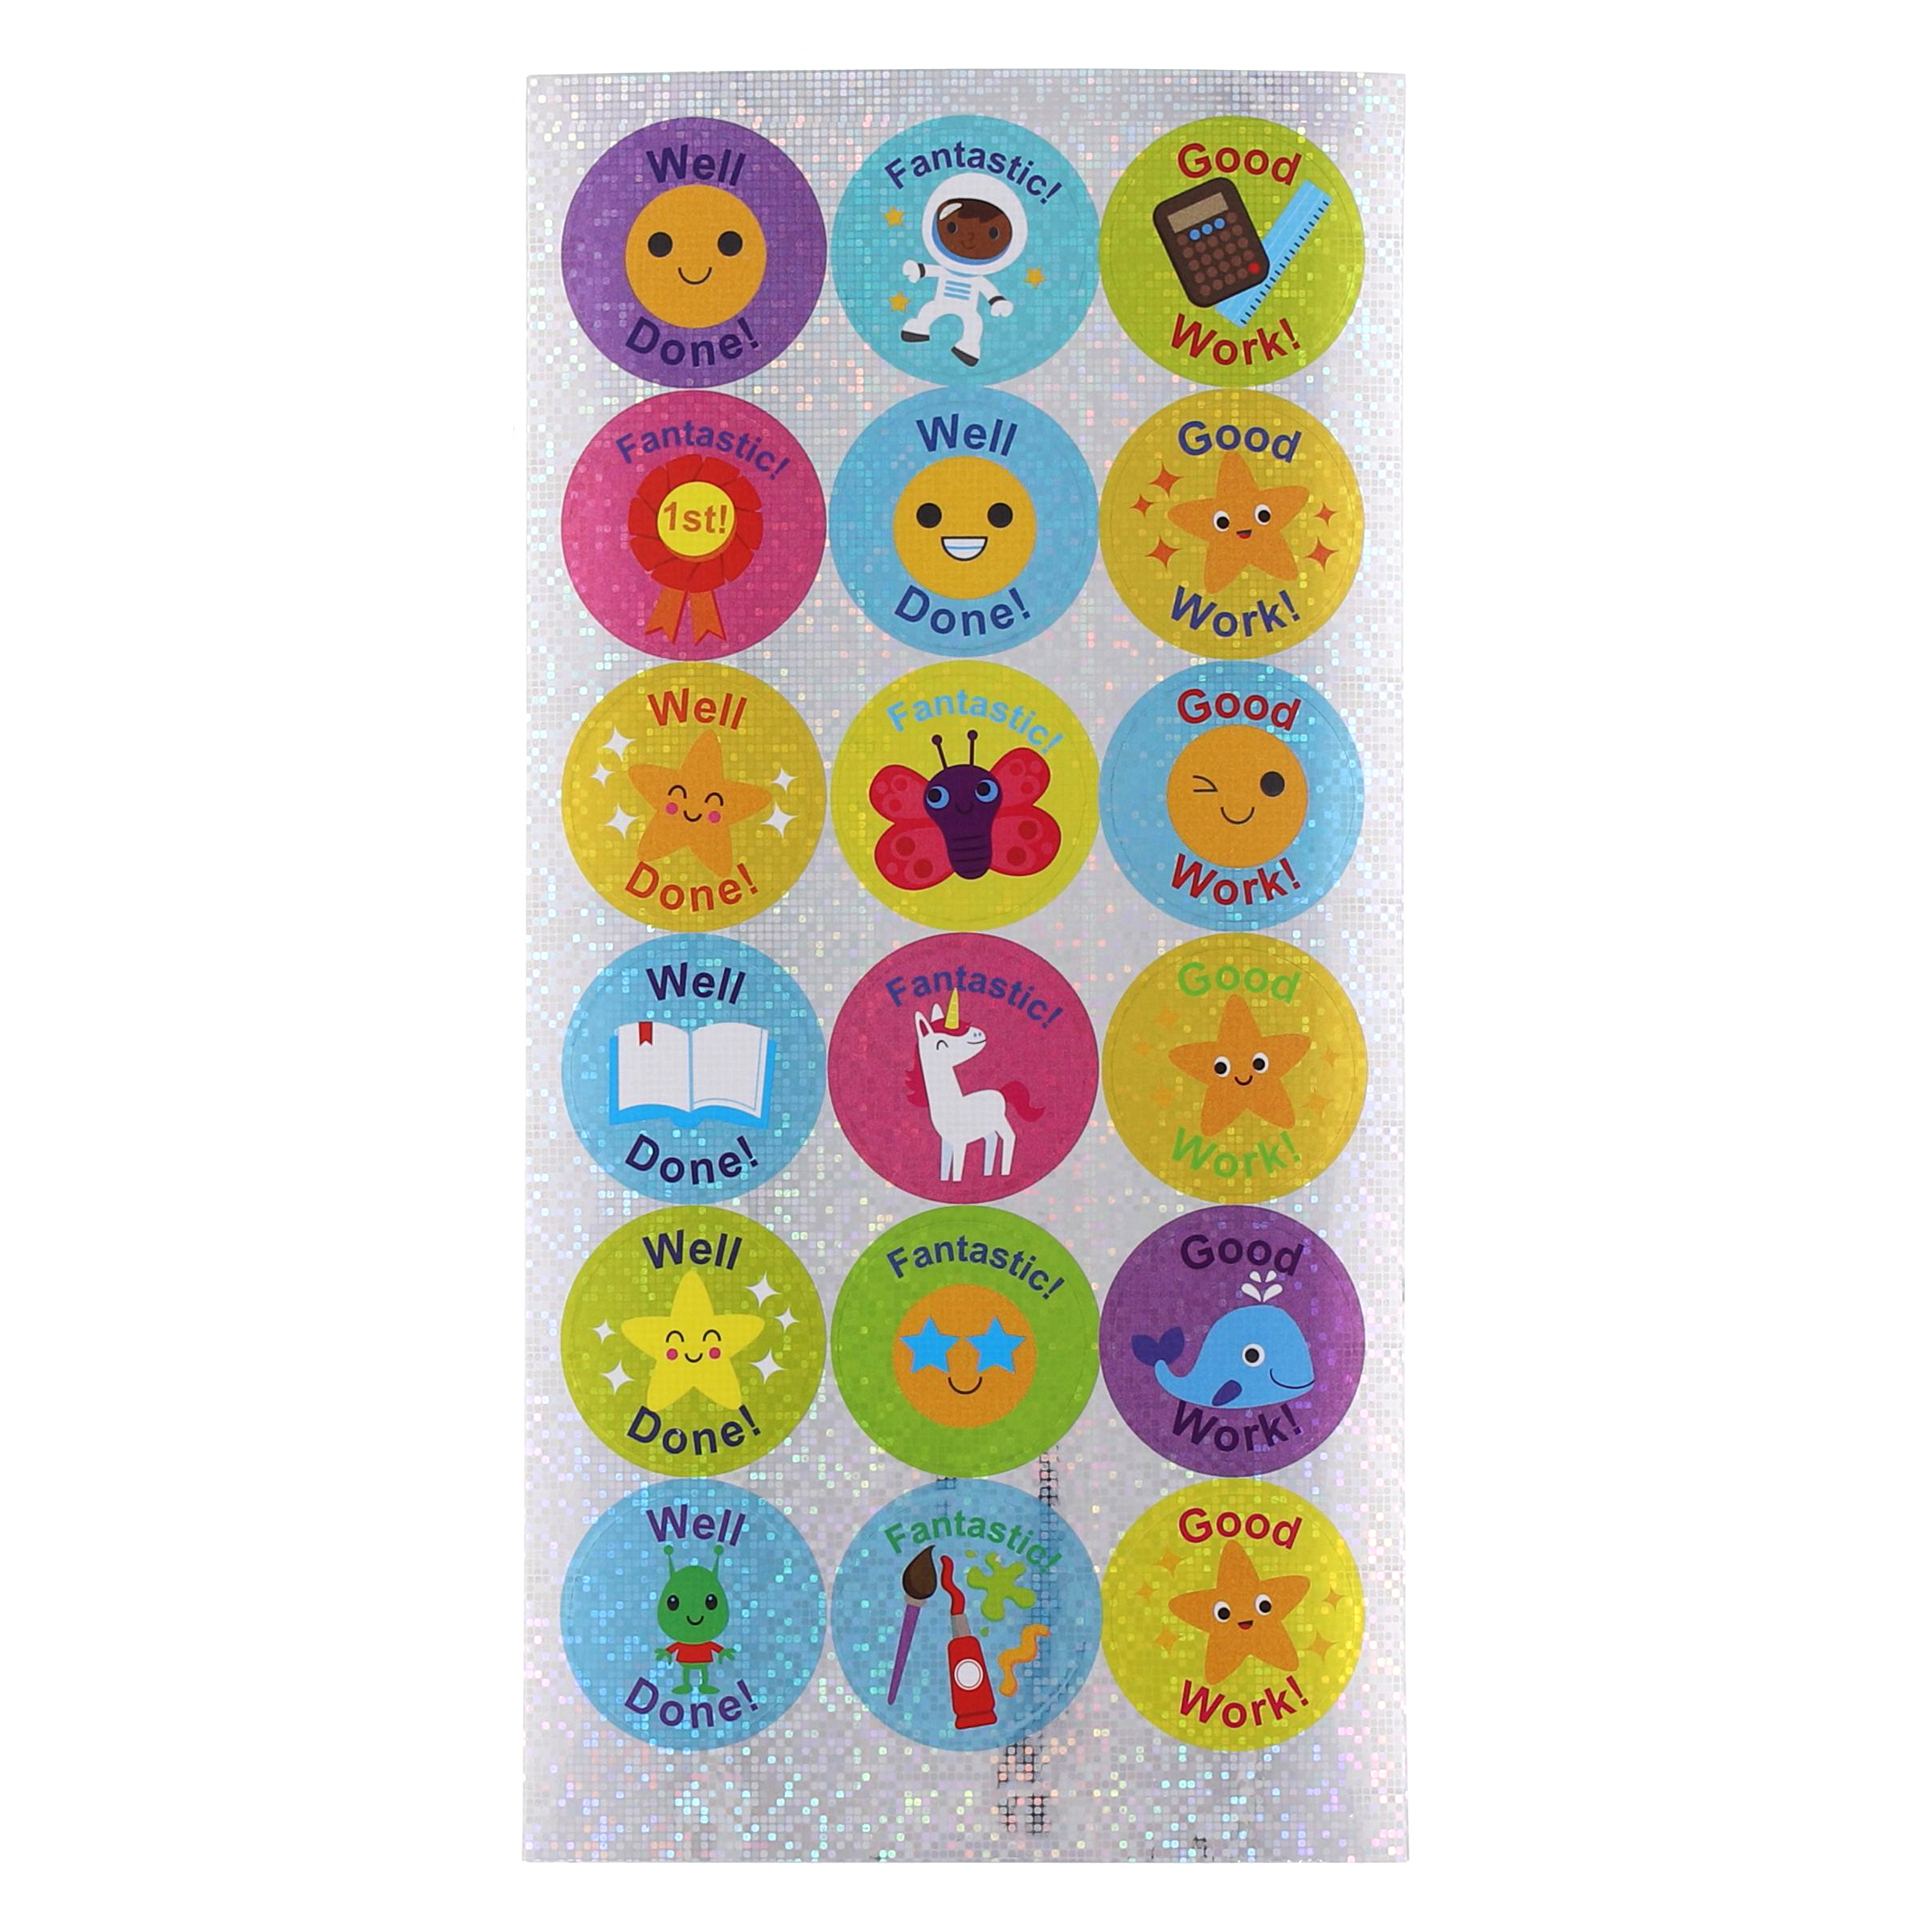 G1778913 Classmates Sparkly Praise Stickers 28mm Pack Of 54 Gls